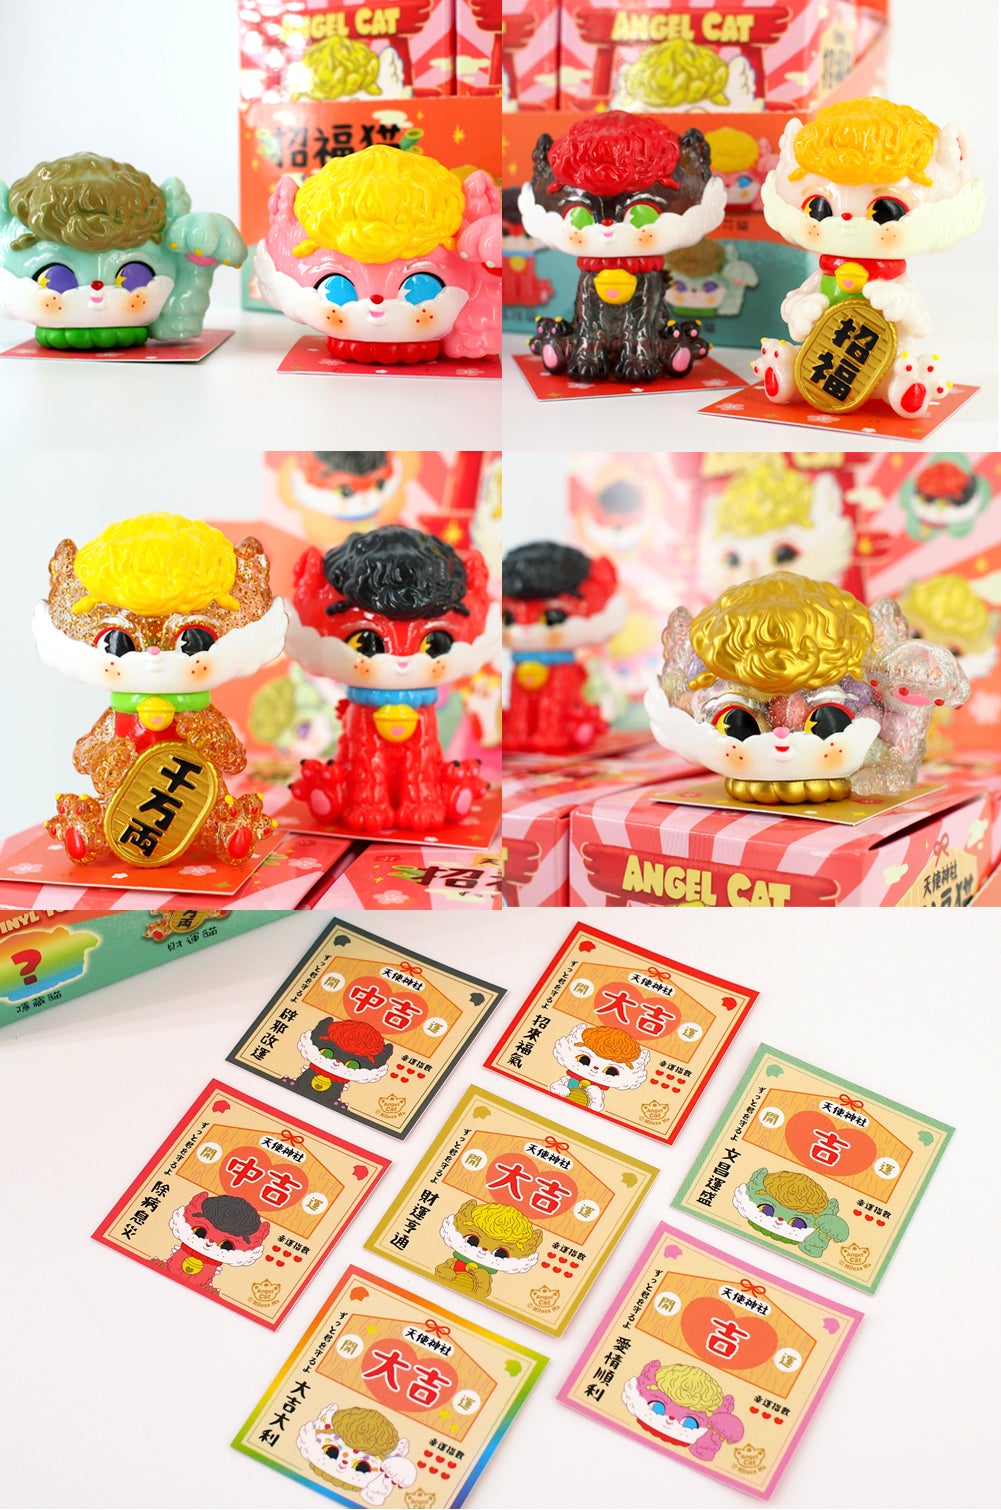 Fortune Angel Cat - Blind Box Series by Miloza Ma